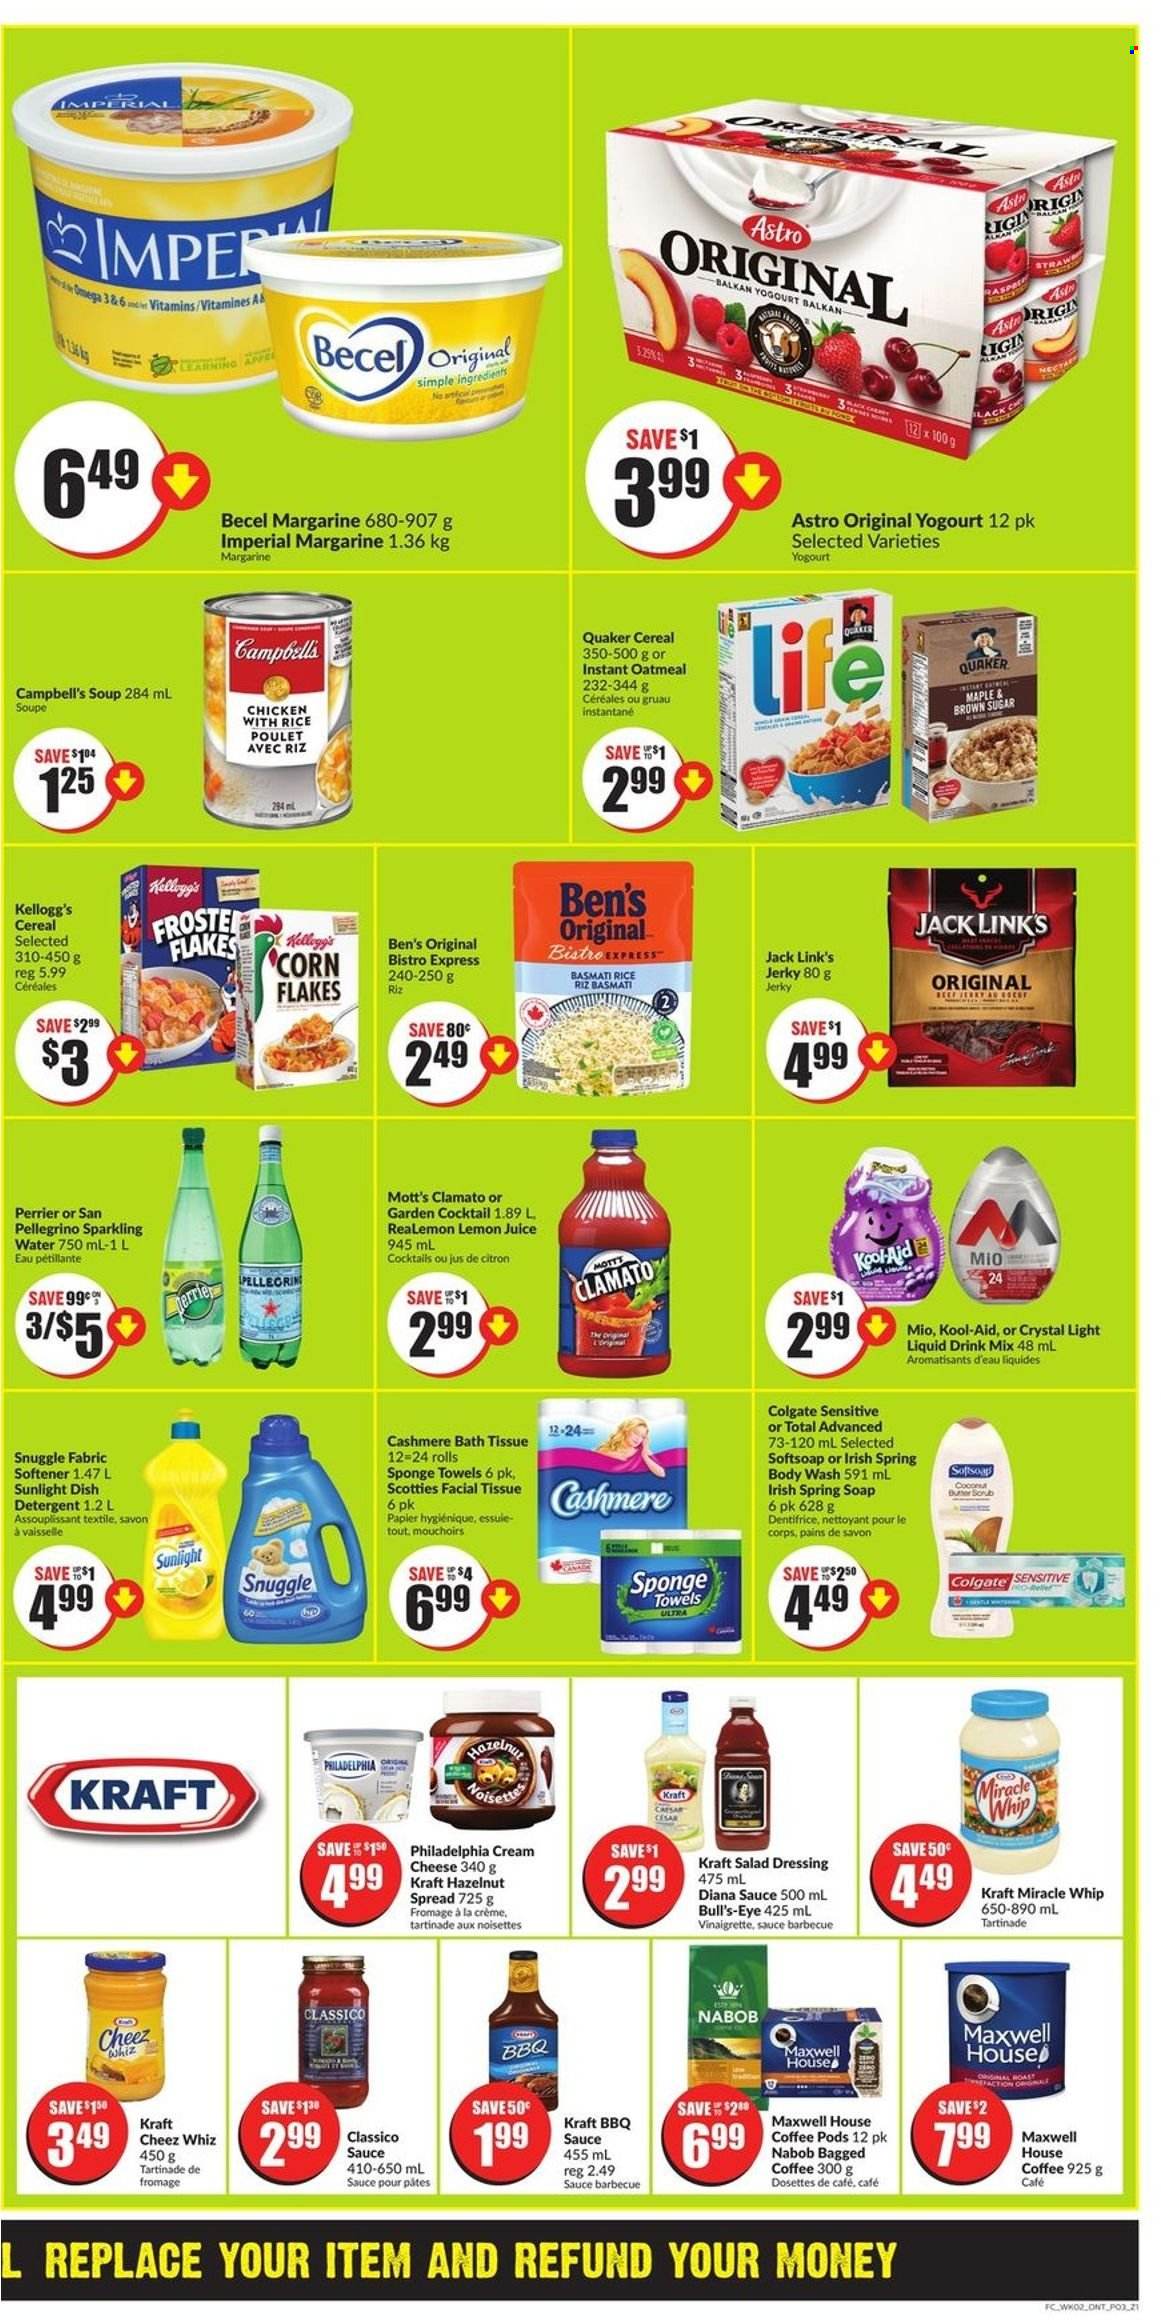 thumbnail - FreshCo. Flyer - May 12, 2022 - May 18, 2022 - Sales products - coconut, Mott's, Campbell's, soup, Quaker, Kraft®, jerky, cream cheese, margarine, Miracle Whip, Kellogg's, Jack Link's, oatmeal, cereals, corn flakes, basmati rice, BBQ sauce, salad dressing, vinaigrette dressing, dressing, Classico, hazelnut spread, Clamato, Perrier, sparkling water, San Pellegrino, lemon juice, Maxwell House, coffee pods, bagged coffee, Omega-3, detergent, Colgate, Philadelphia. Page 3.